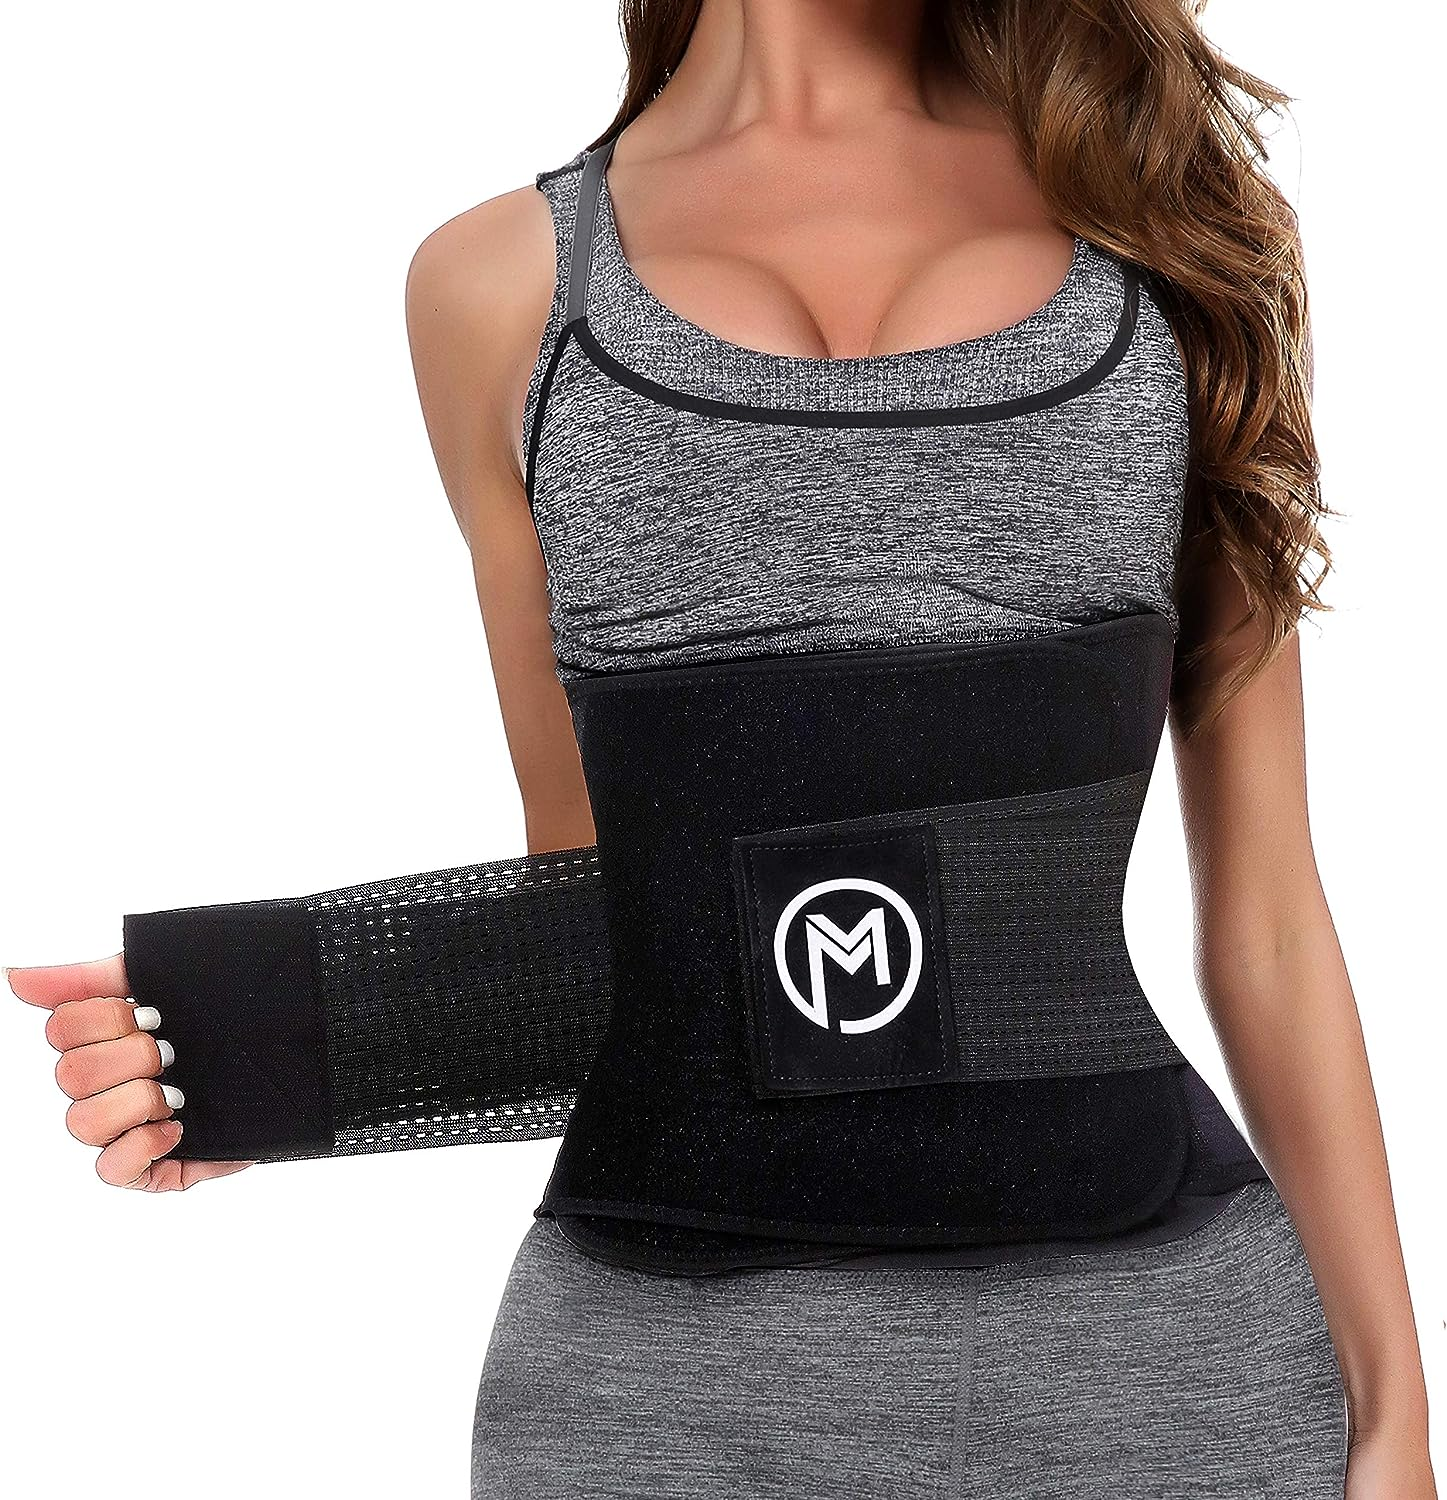 A woman wearing MERMAID'S MYSTERY Waist Trimmer Trainer